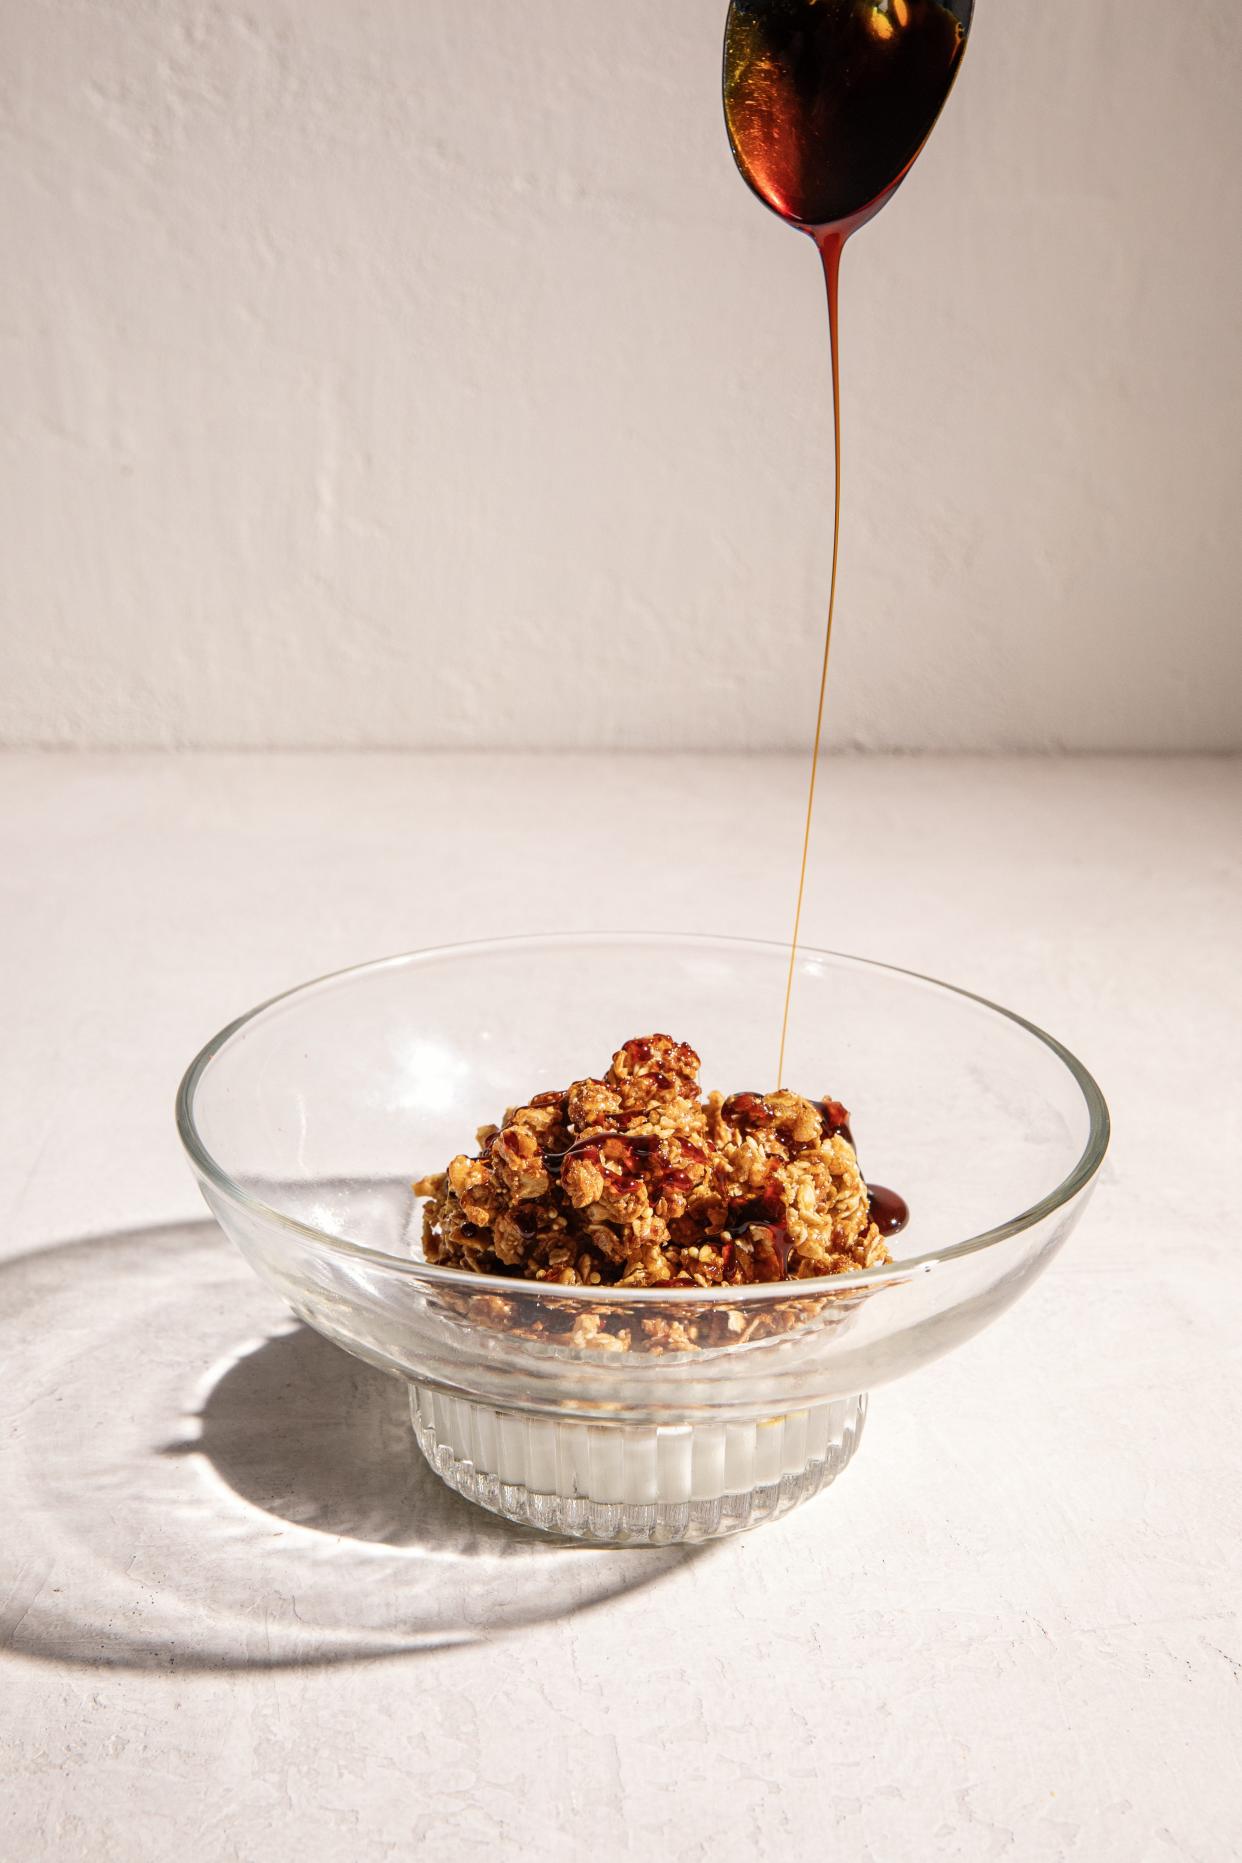 Chef Chris McClendon's "Sexy Breakfast" cookbook introduces an elevated take on breakfast staples, such as homemade granola with a drizzle of honey.